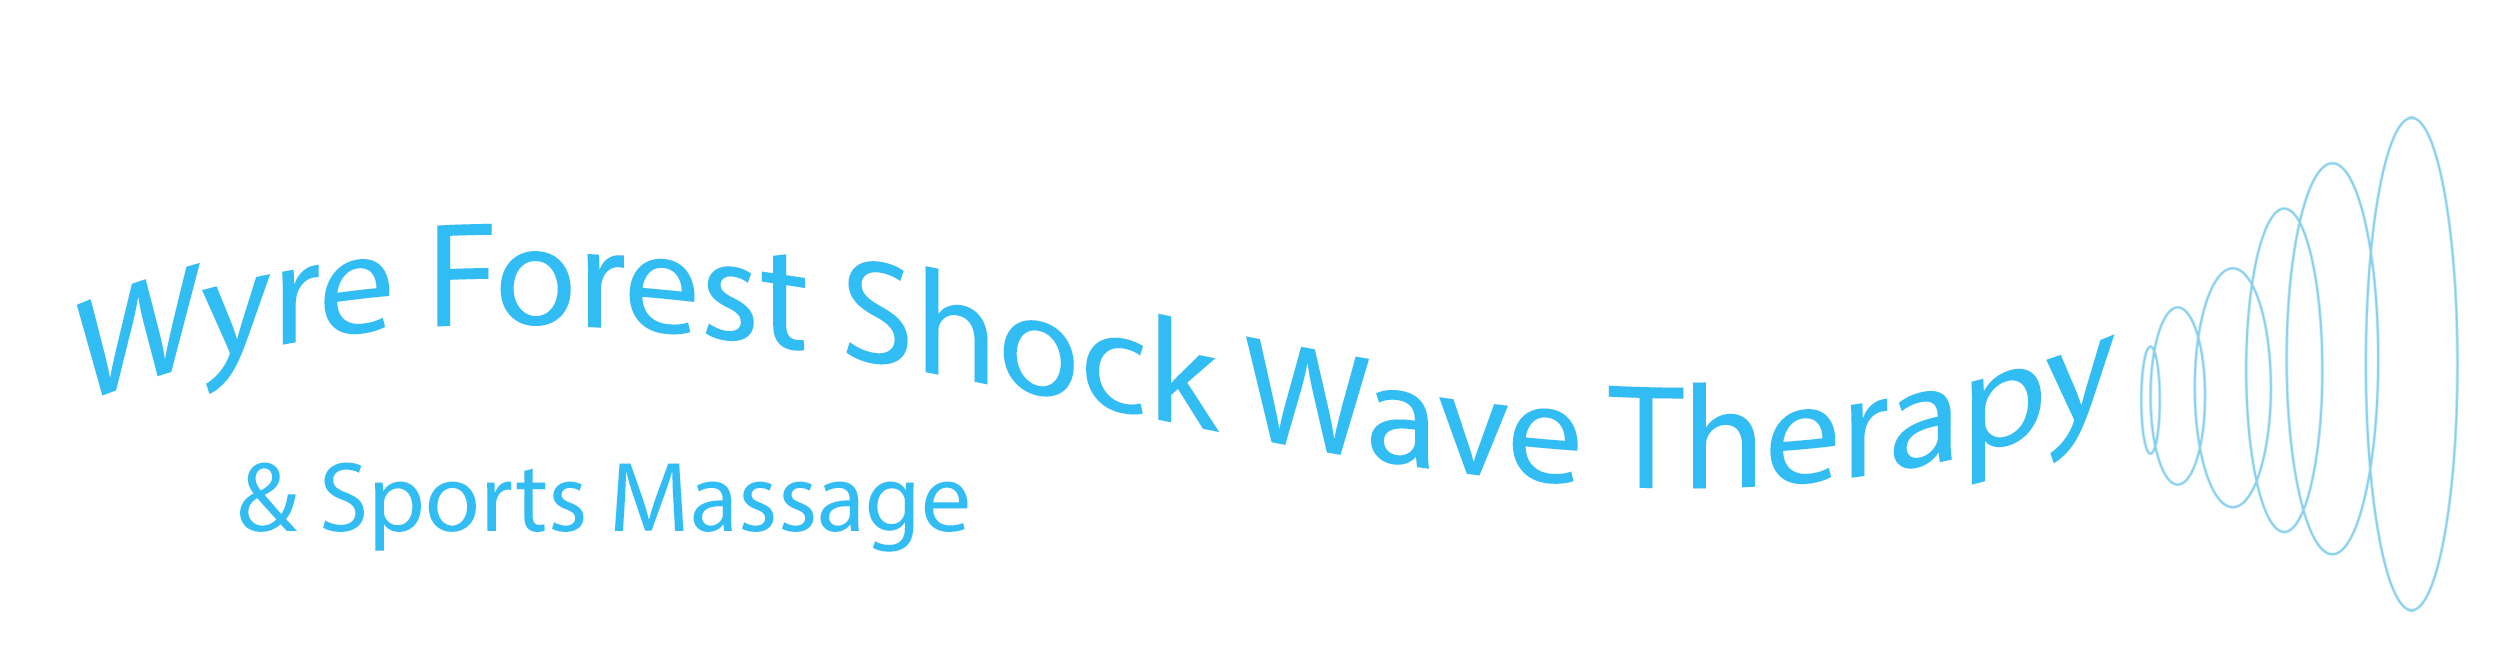 Wyre Forest Shockwave Therapy